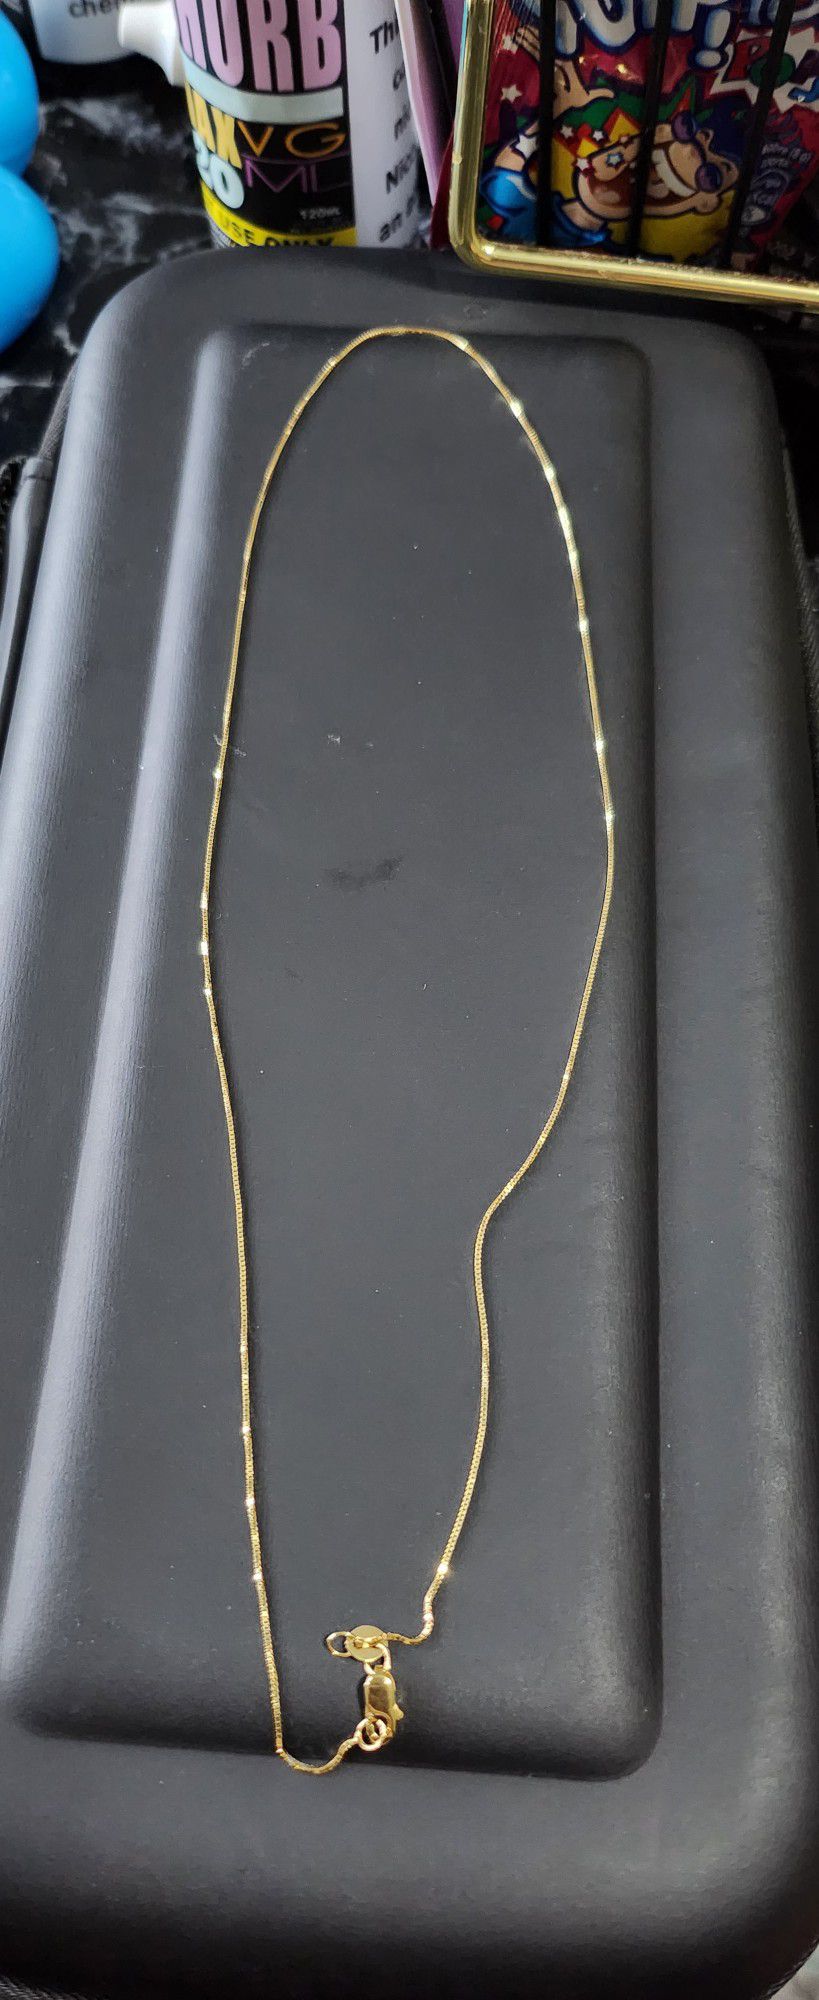 Necklace solid real gold 14k box chain guaranteed size 18